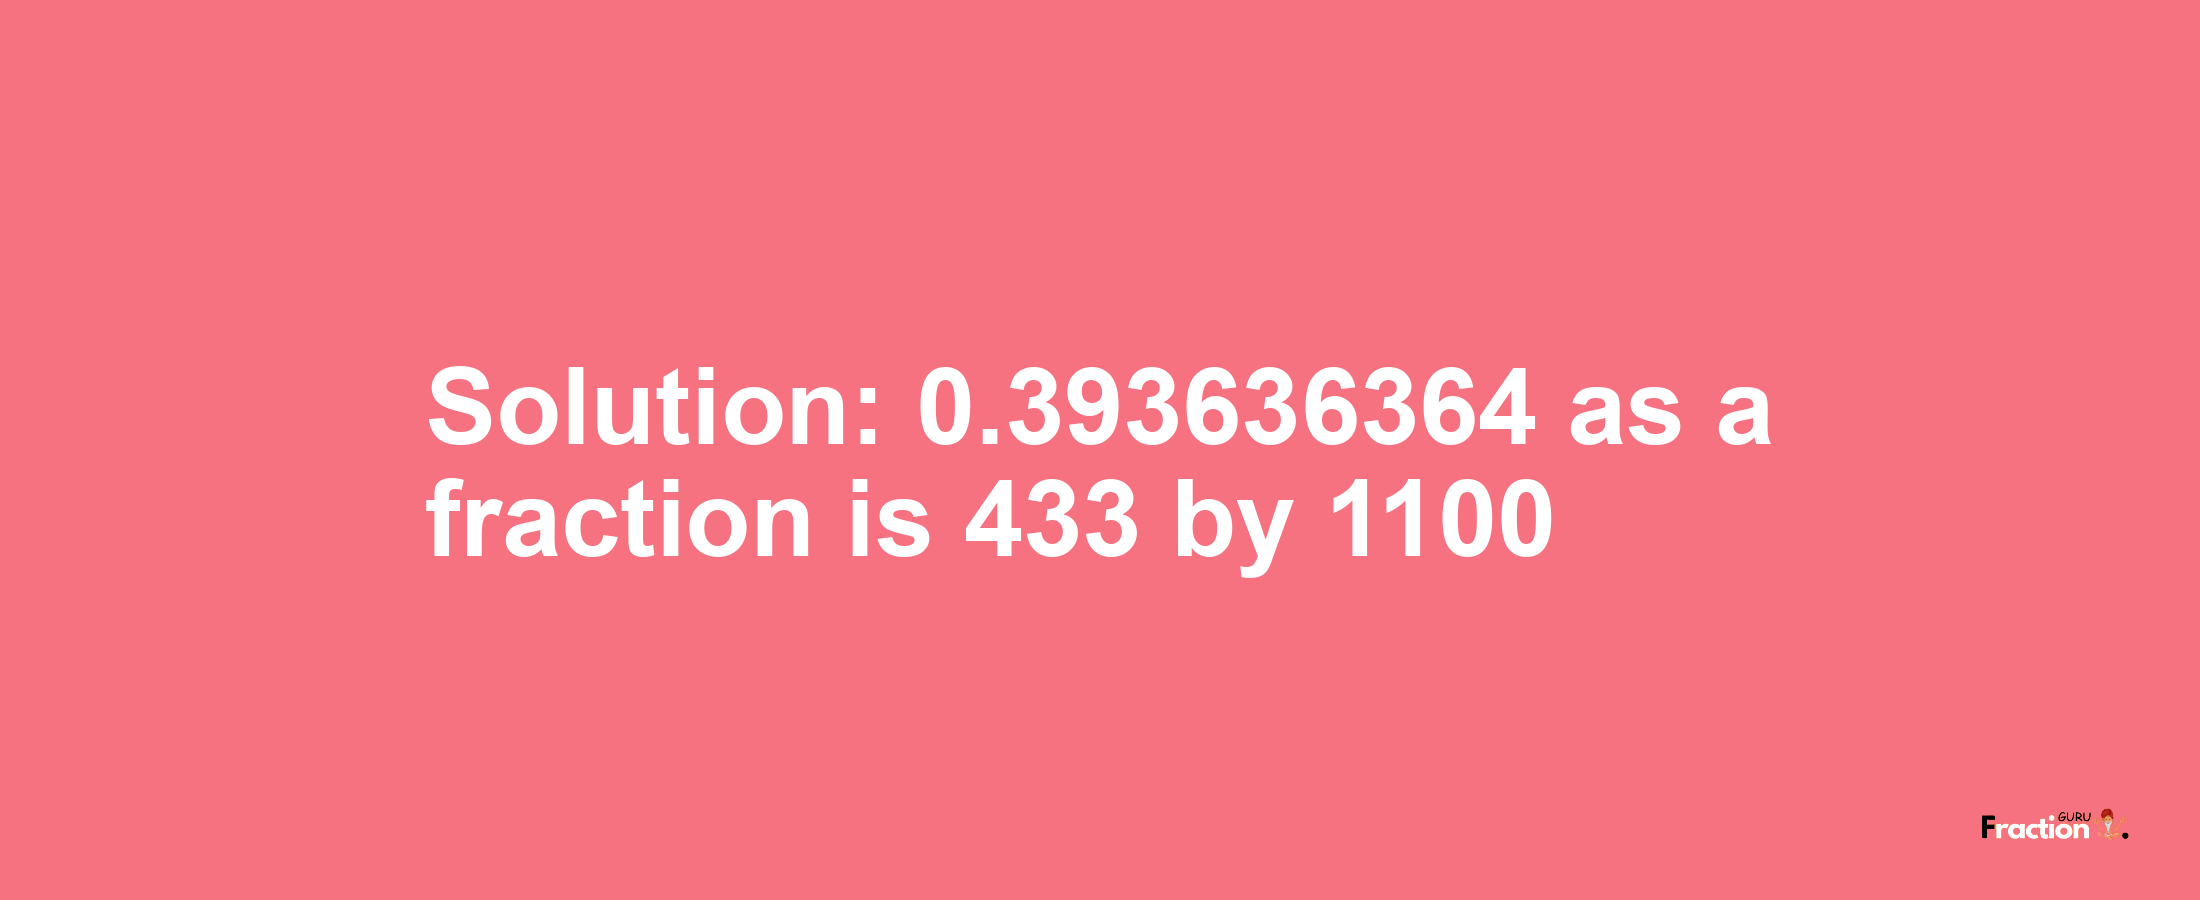 Solution:0.393636364 as a fraction is 433/1100